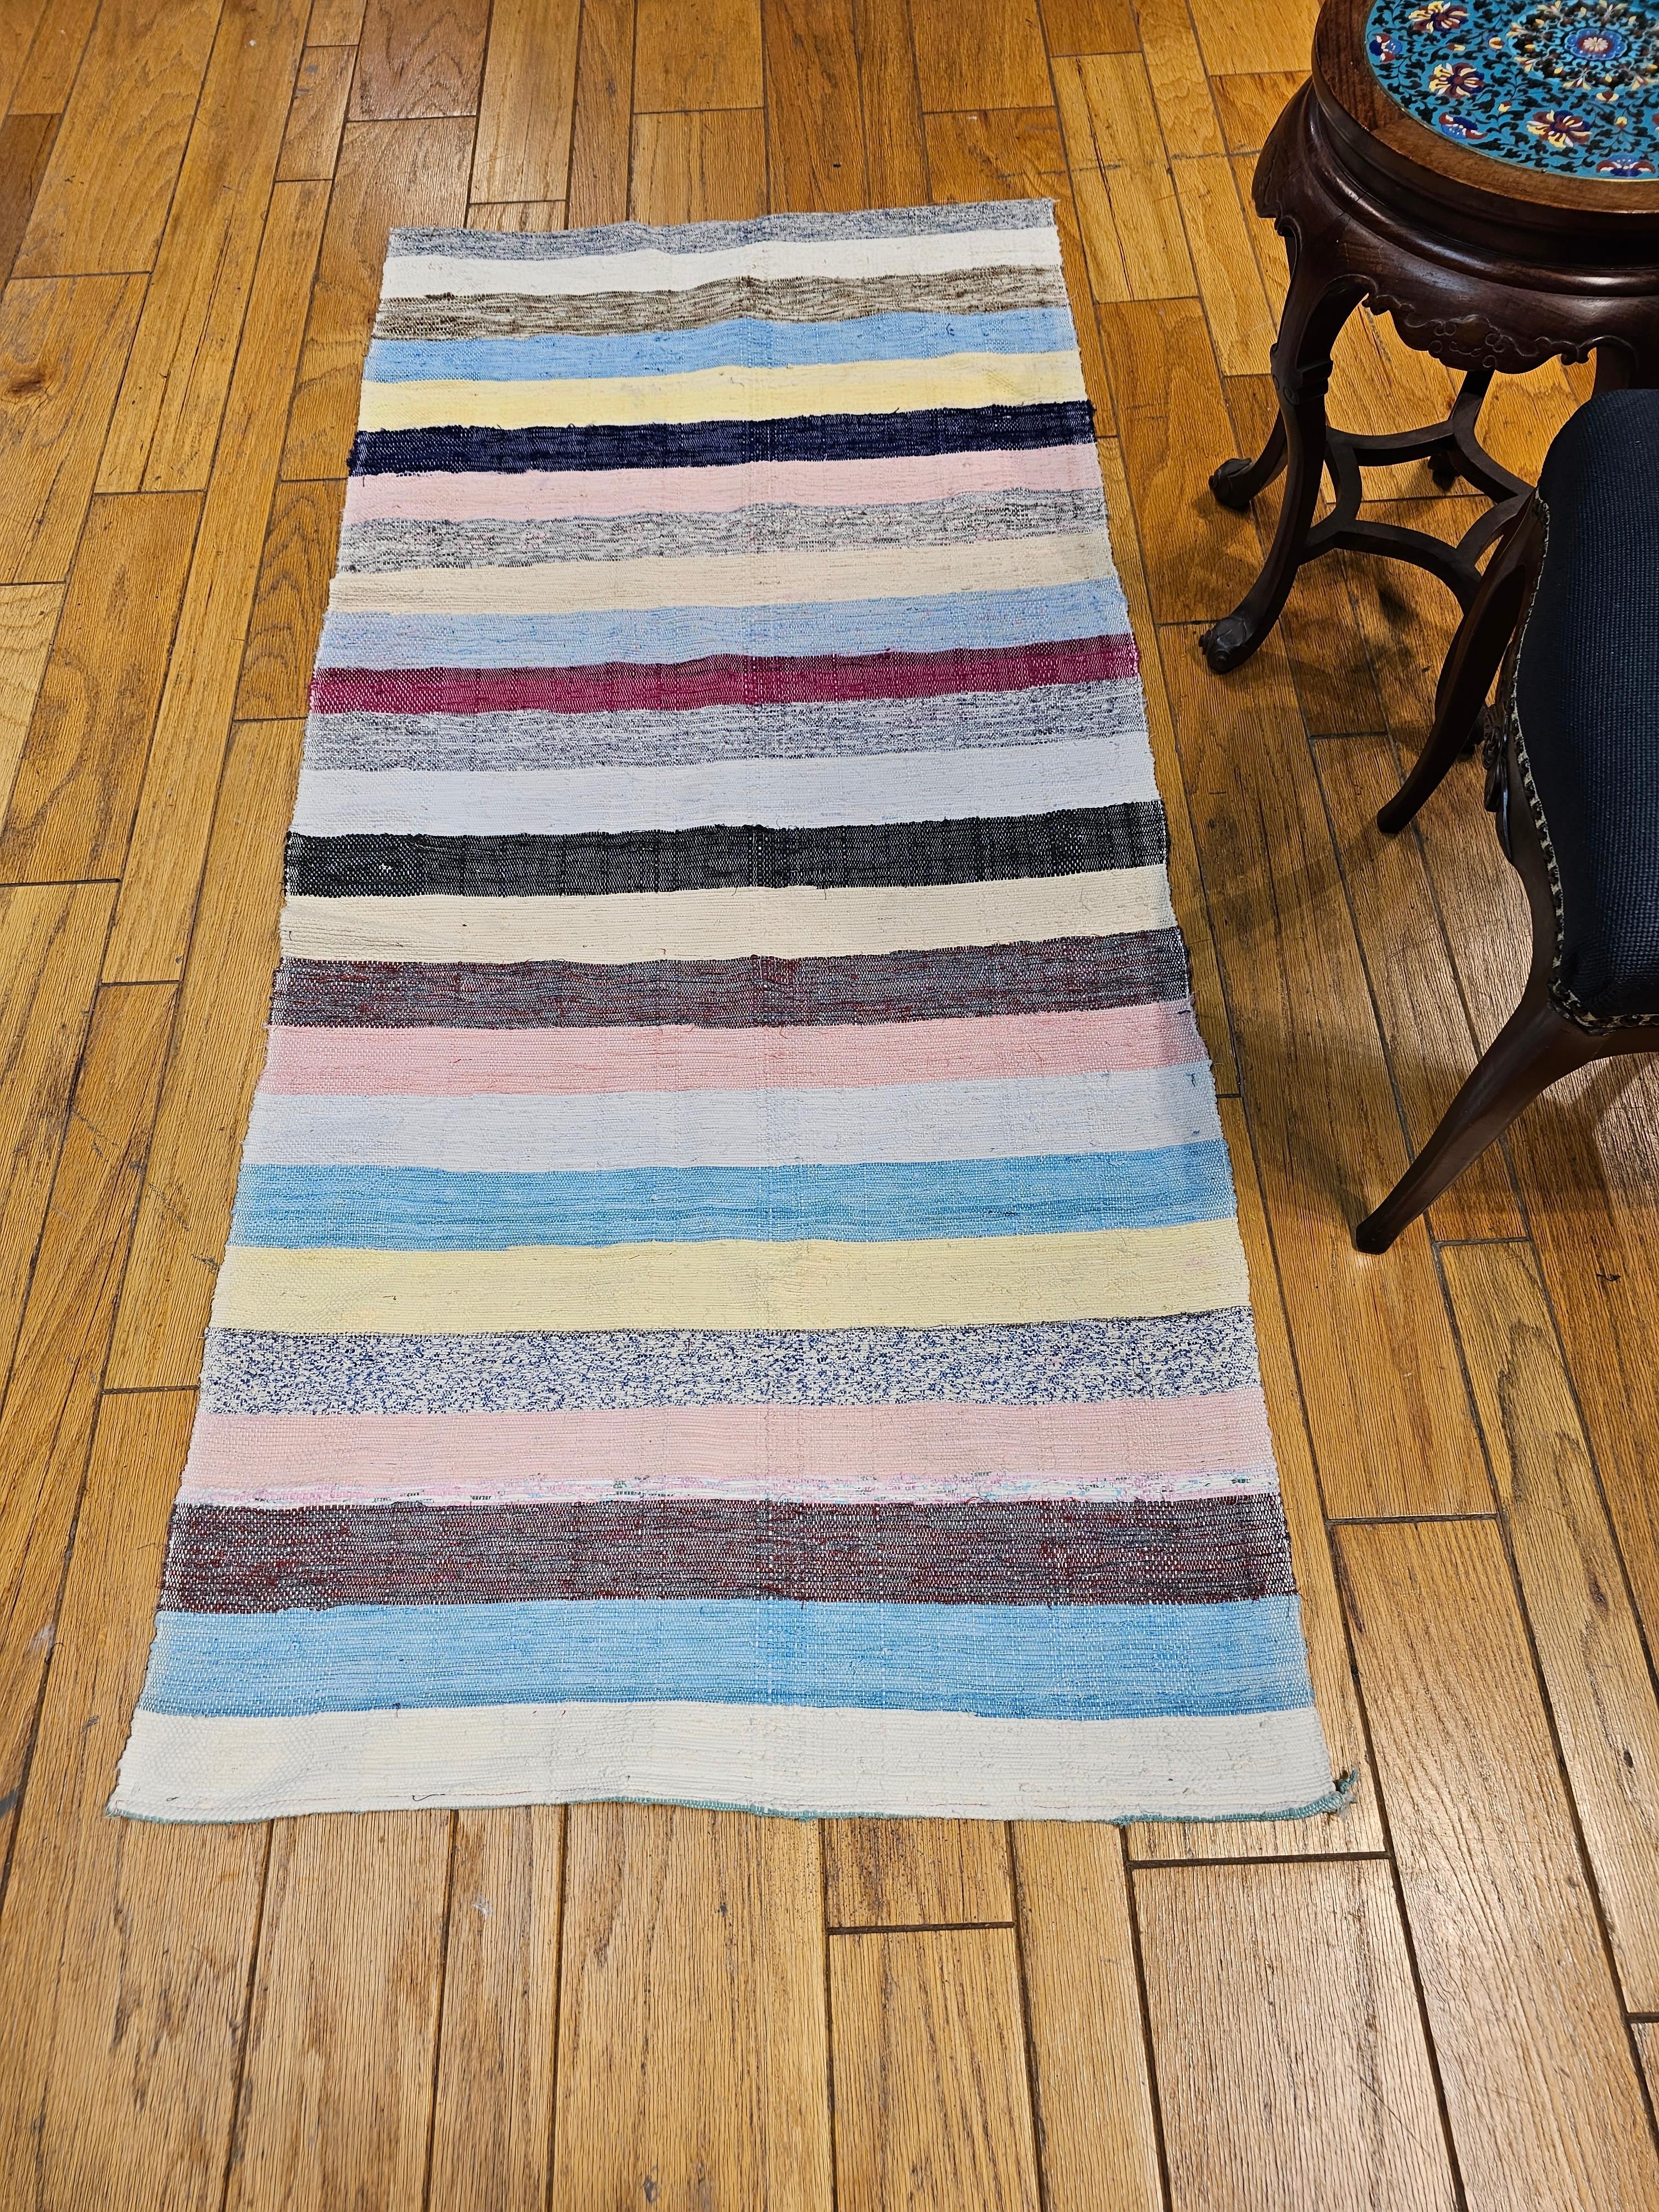 Vintage American Rag Area Rug in Stripe Pattern in Ivory, Blue, Pink, Green, Red For Sale 4